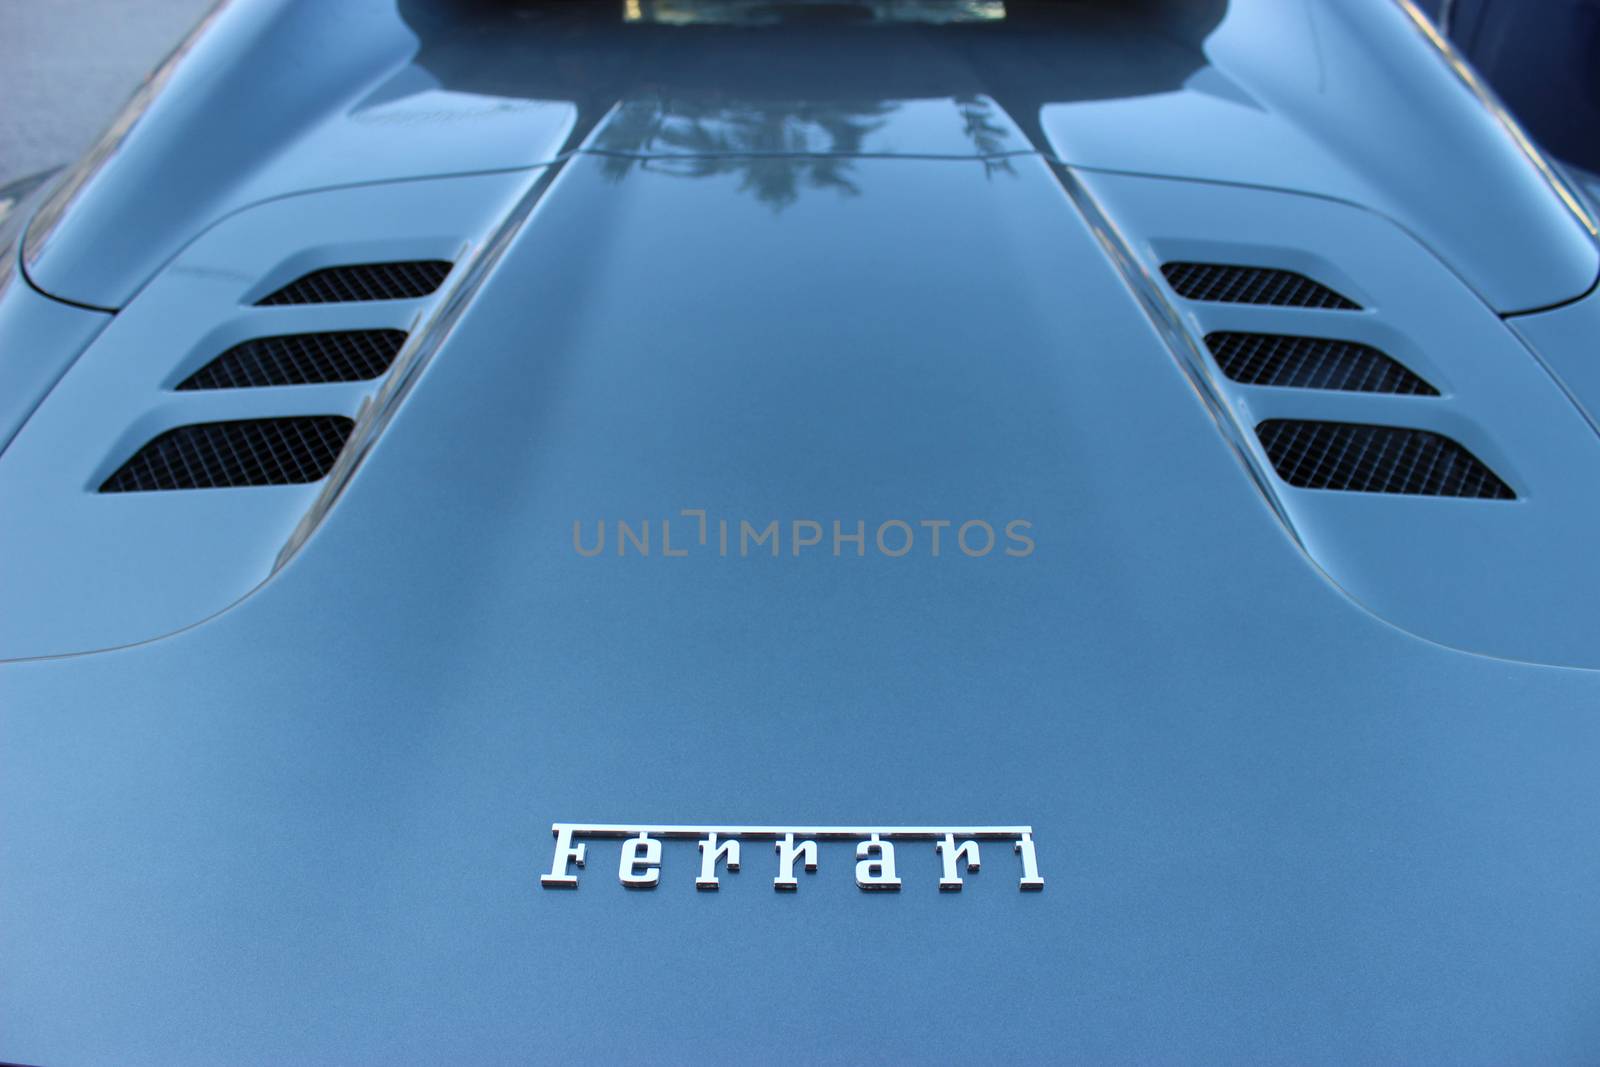 Monte-Carlo - JAN 12 : Logo of Ferrari on a Cowl of blue Sport Car parked in front of the Monte Carlo Casino, south of France on January 16, 2016 in Monte-Carlo, Monaco
